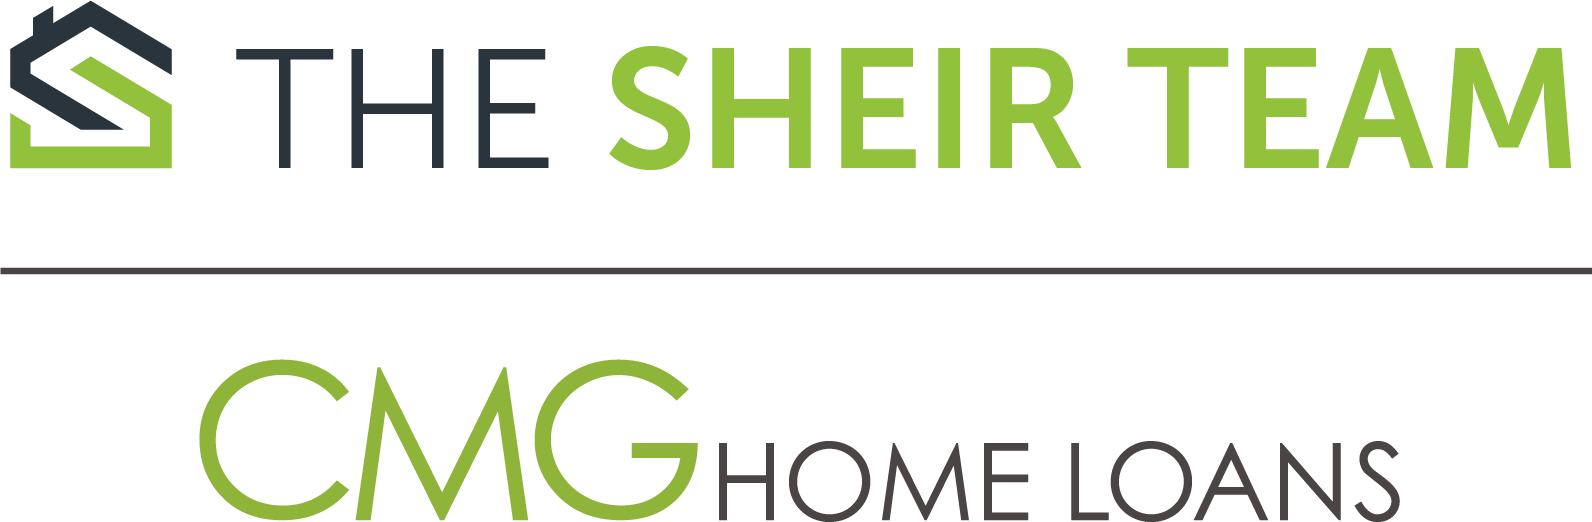 About The Sheir Team